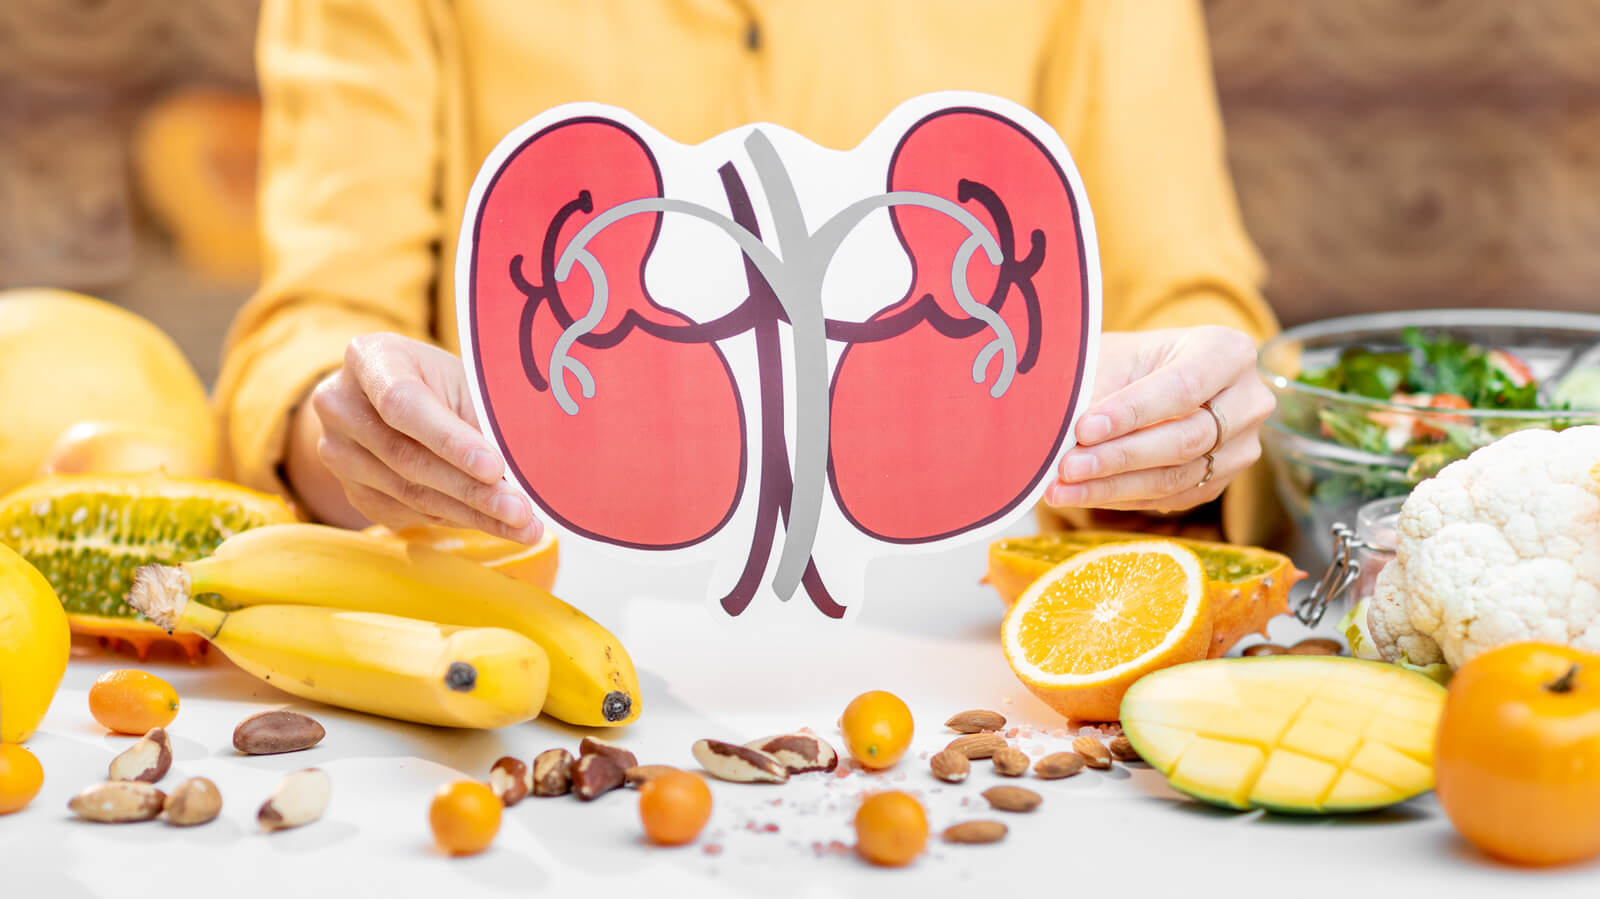 Know 7 foods that kidney patients should avoid